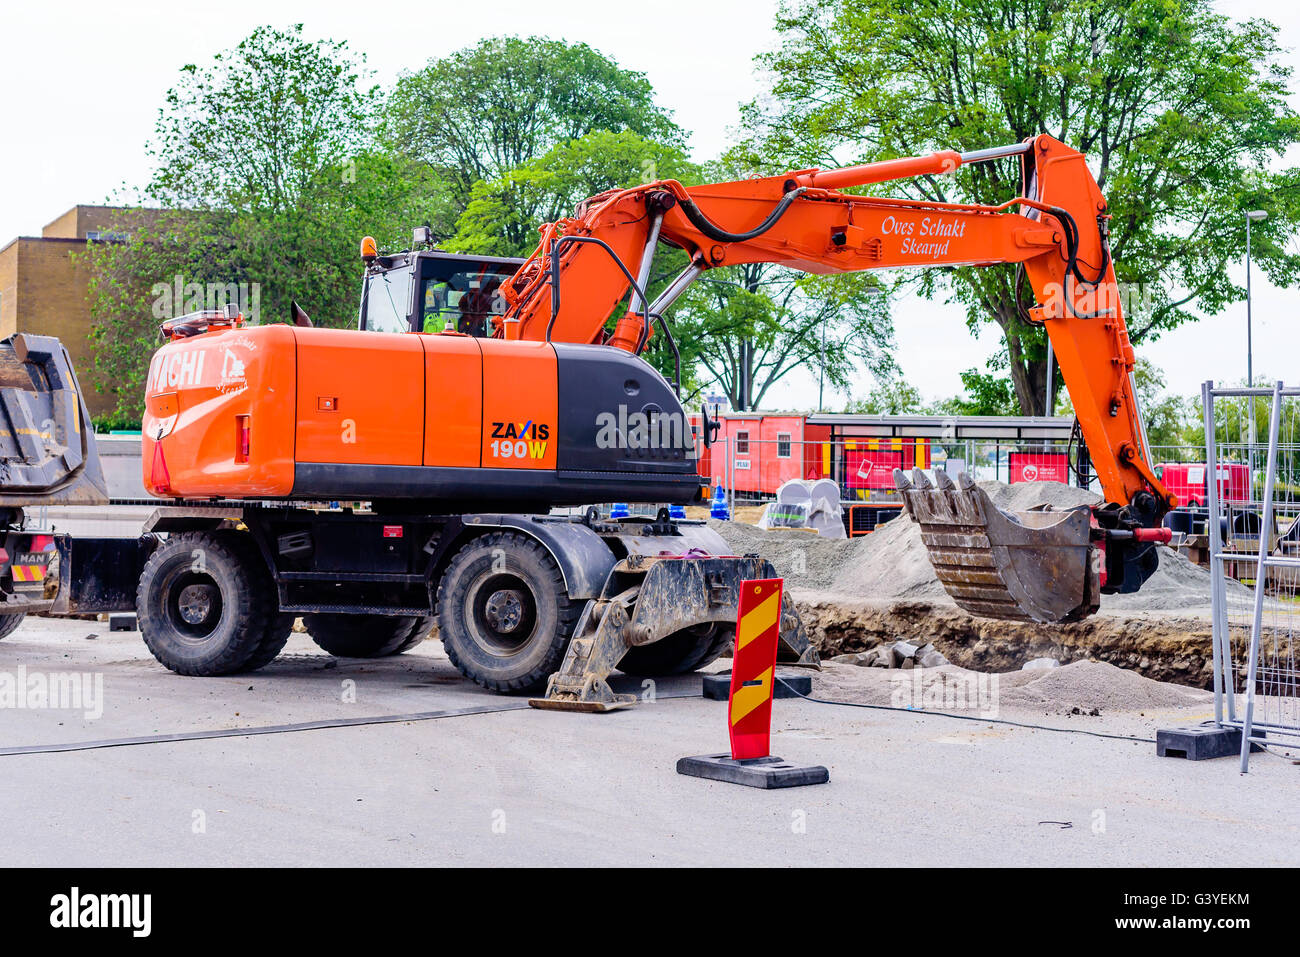 Karlskrona, Sweden - June 16, 2016: Orange Hitachi Zaxis 190W excavator digging out stones from a hole in a parking lot at Potth Stock Photo